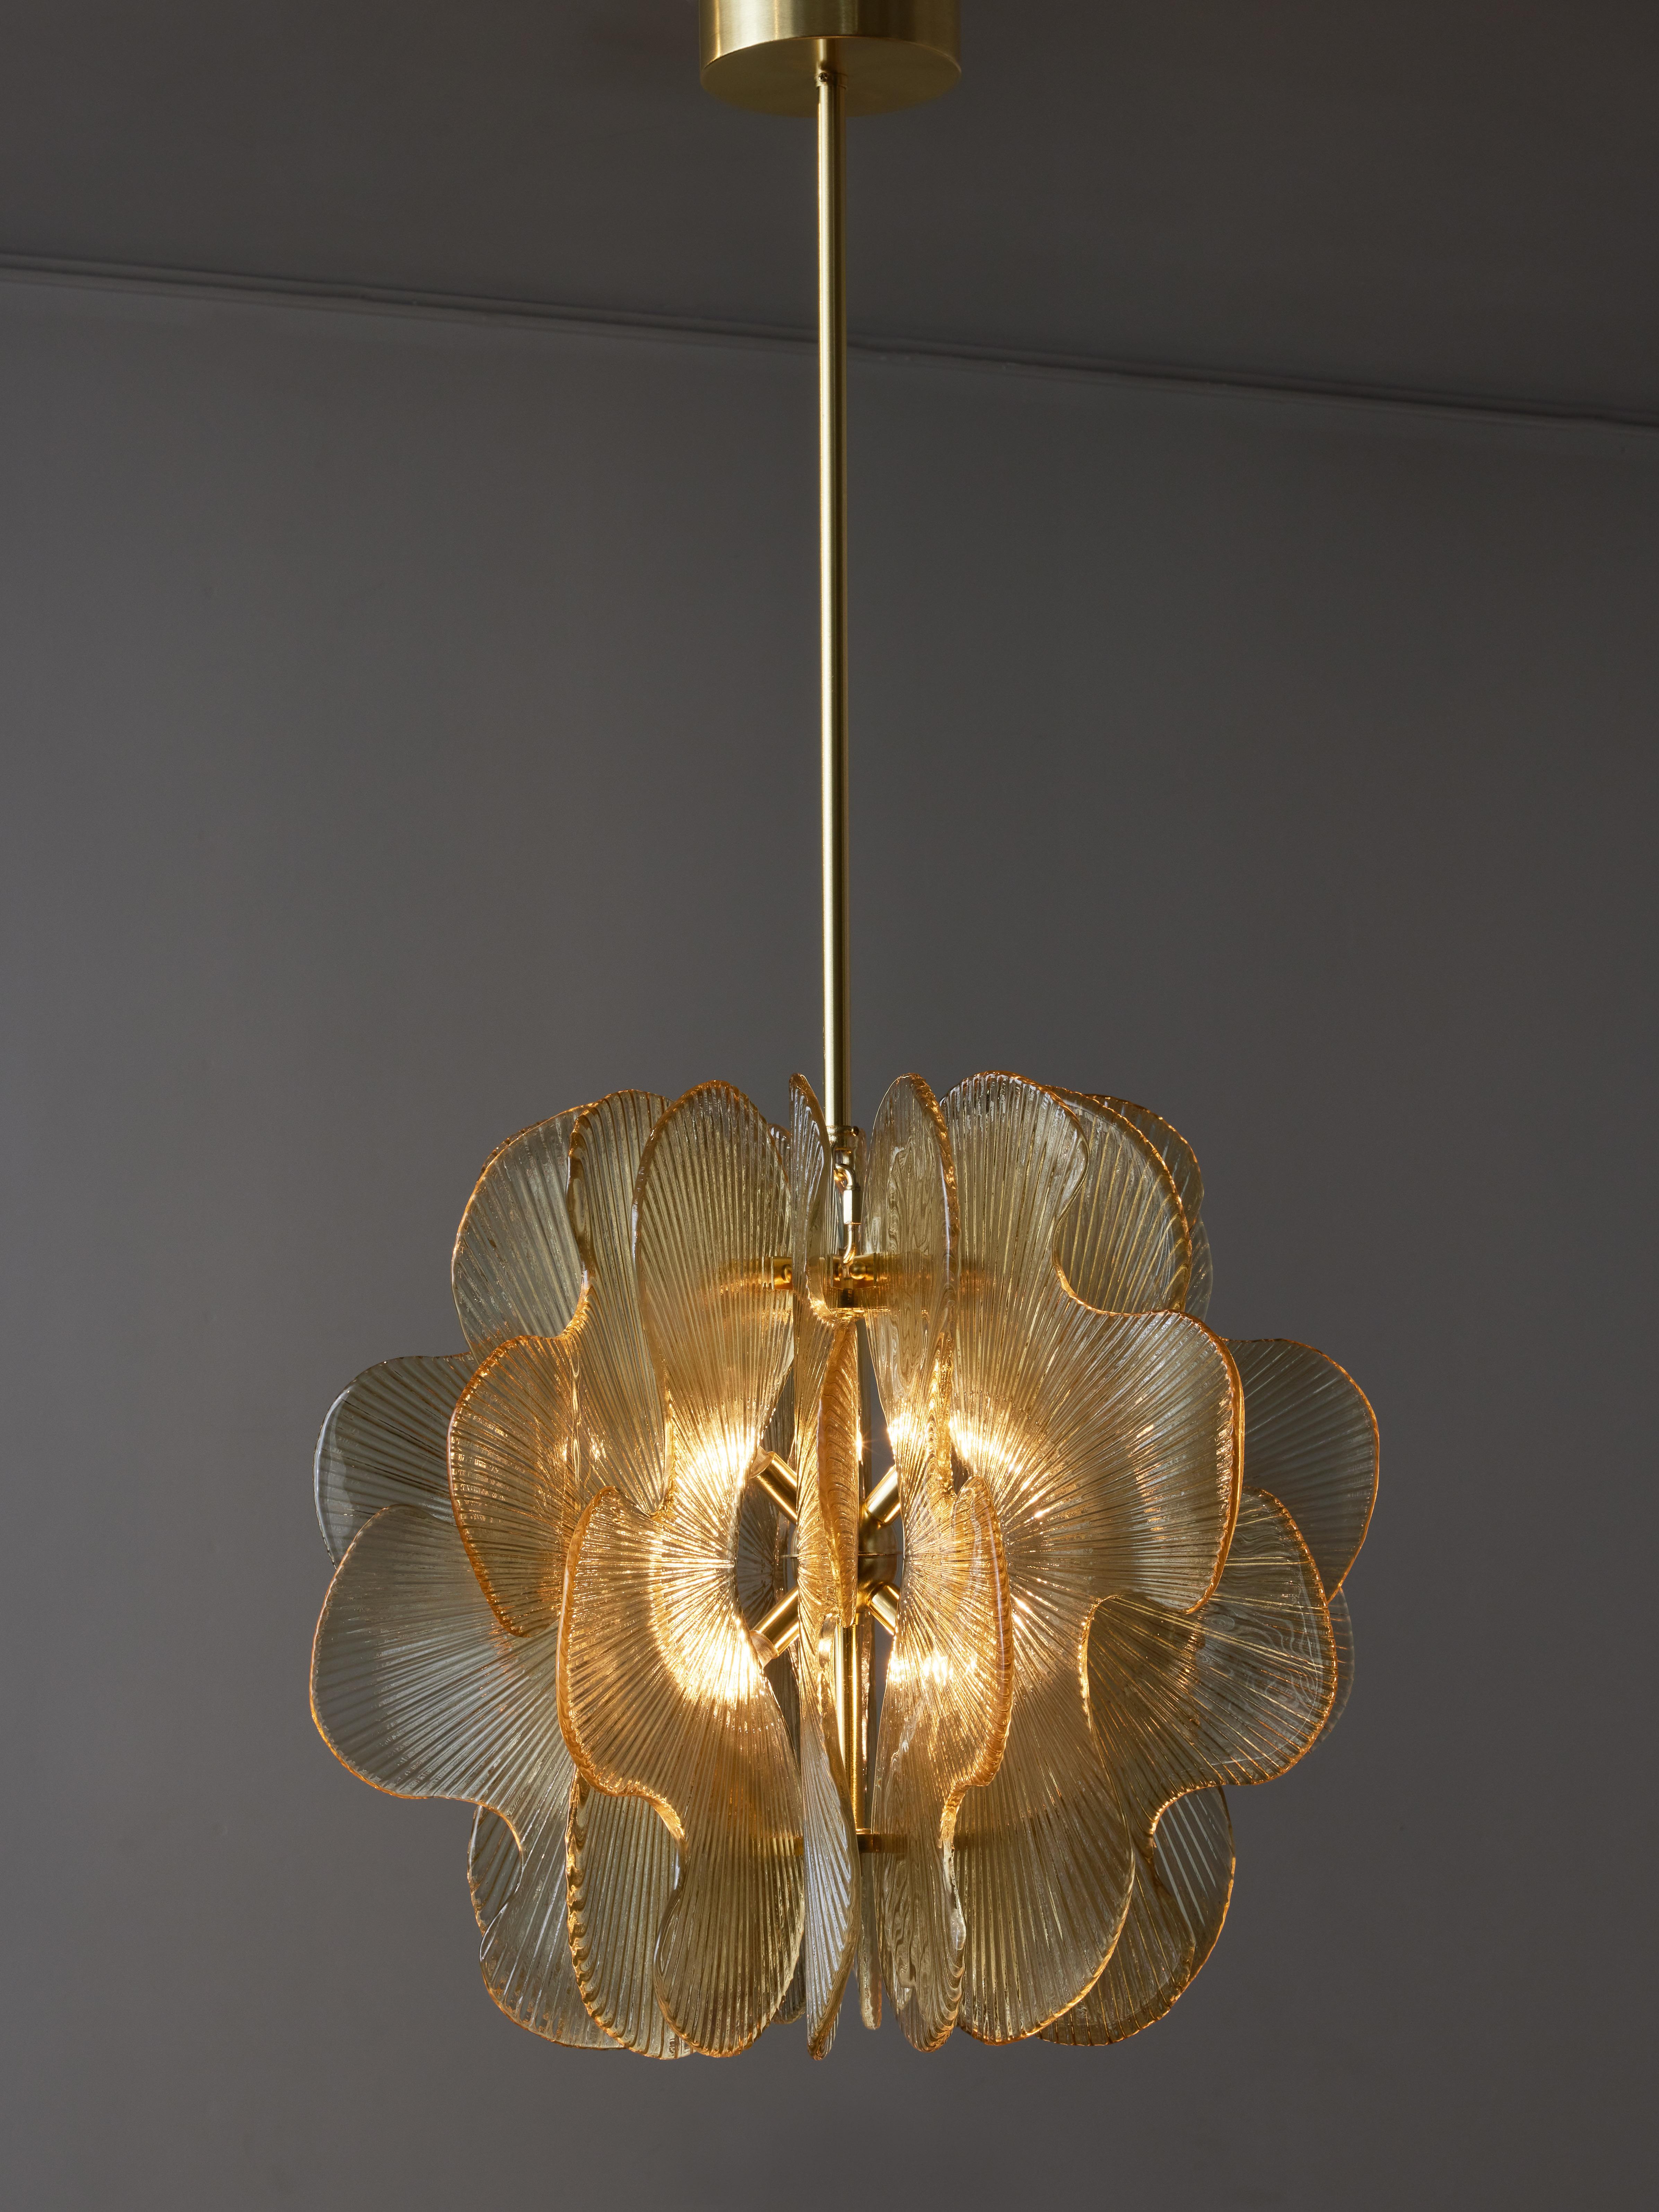 Brass suspensions on which are placed different shaped Murano glass slabs streaked and tinted.